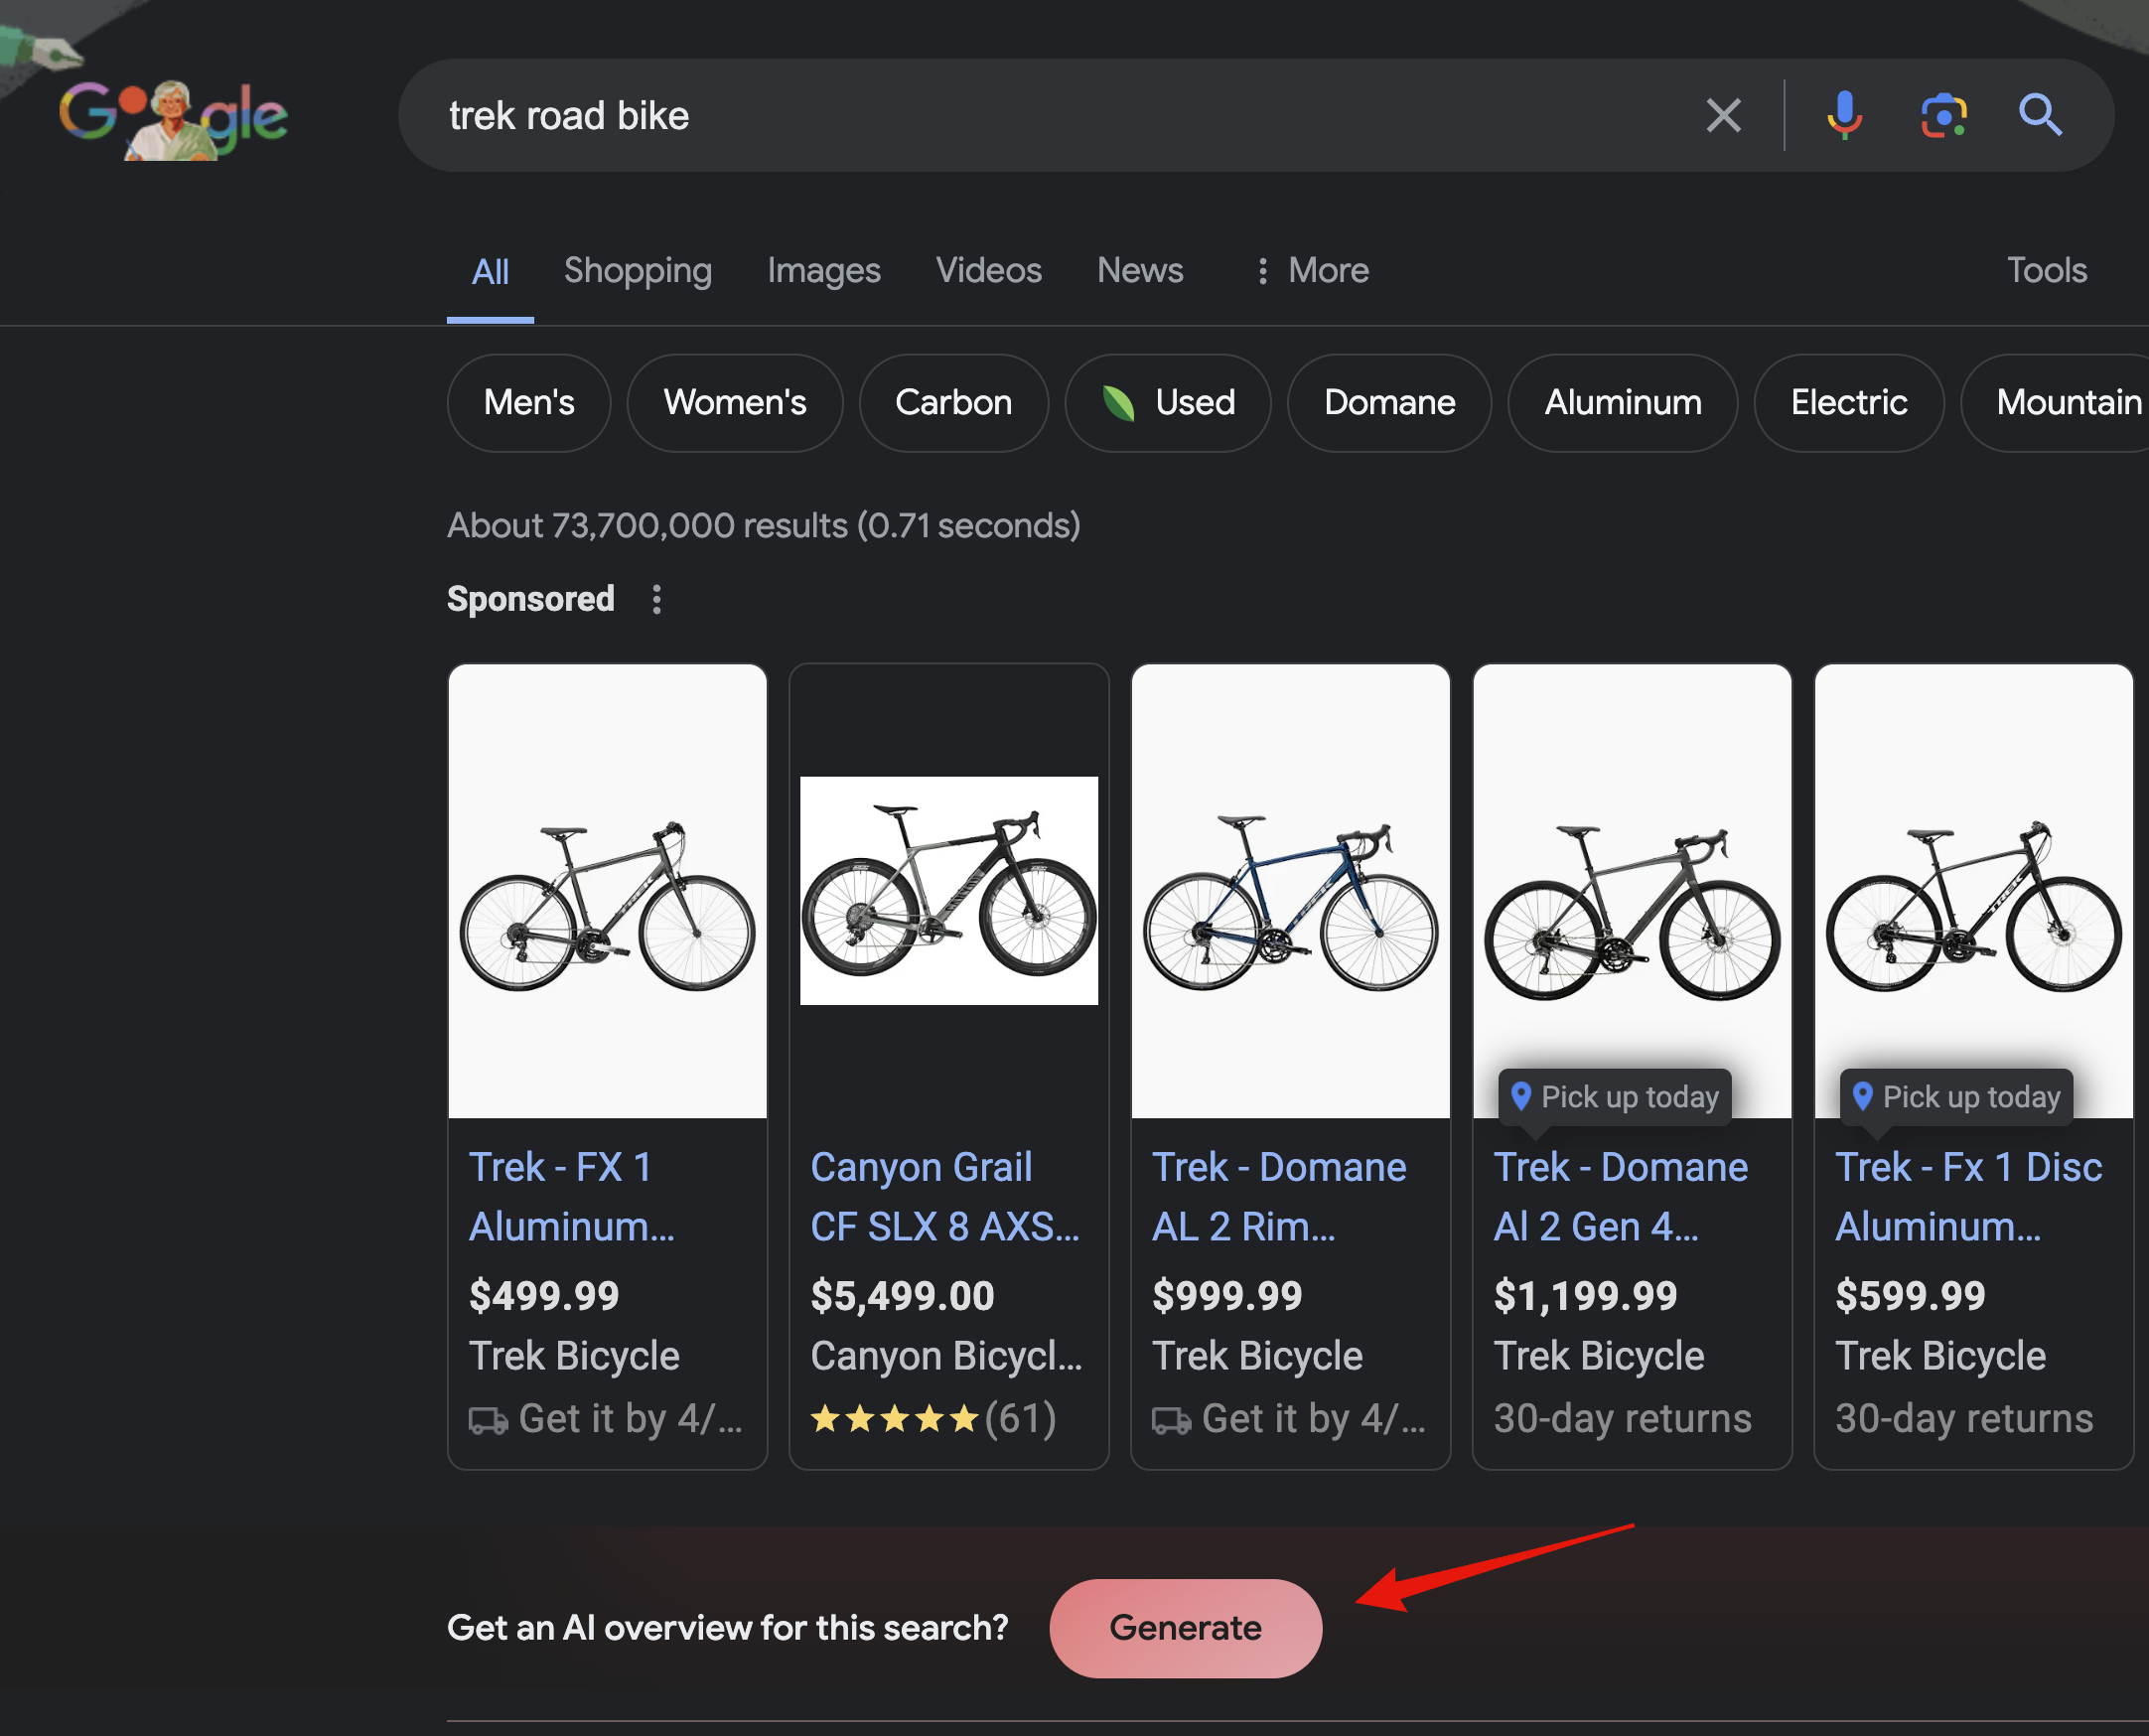 Screenshot of a Google SGE hunt  results leafage   for "trek bike," displaying assorted  models of trek bicycles disposable  for purchase, with terms  accusation  and lawsuit    ratings. A reddish  arrow points to the "generate